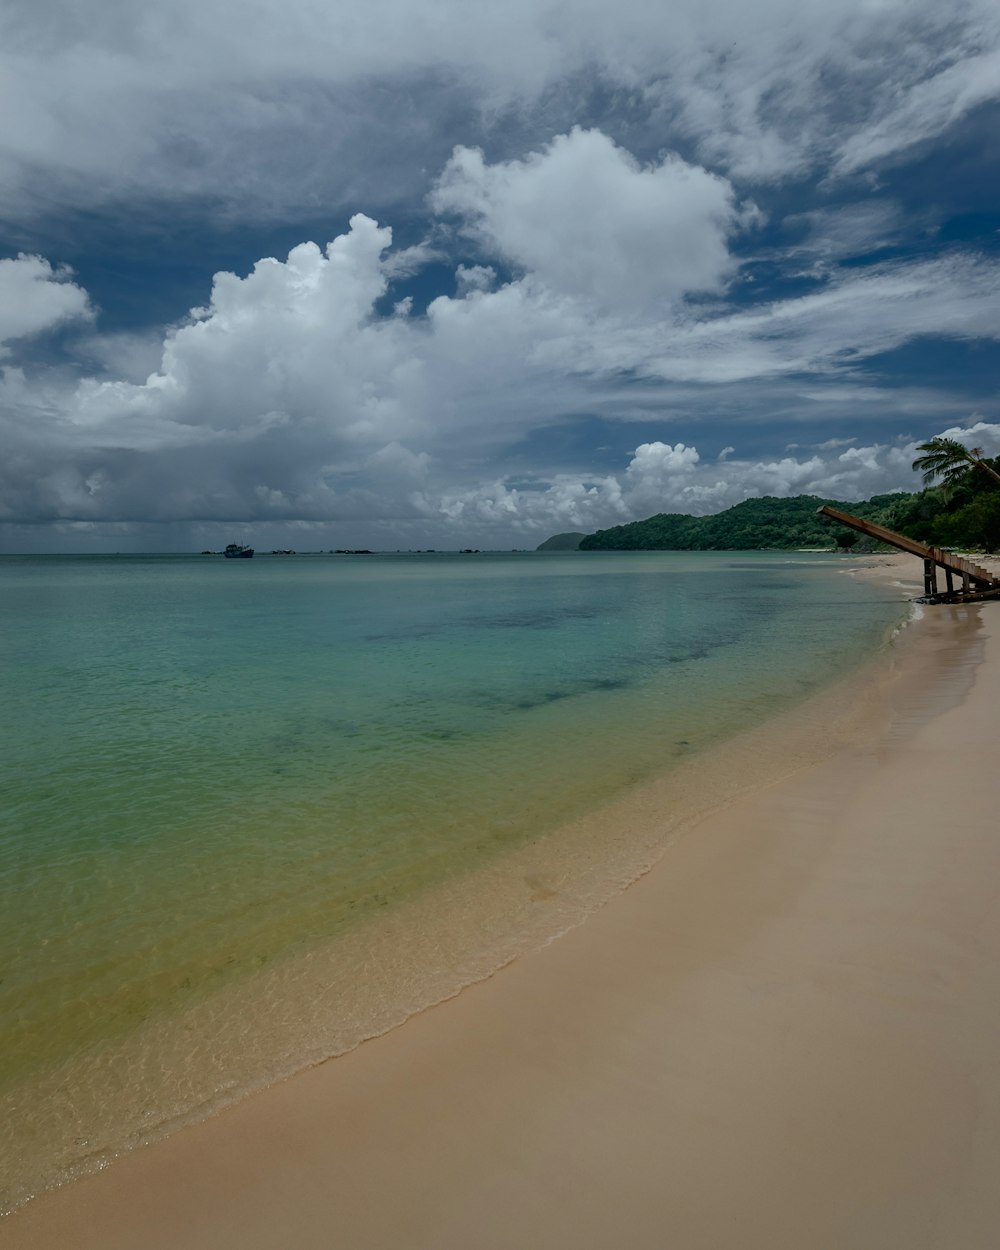 a sandy beach with clear blue water under a cloudy sky